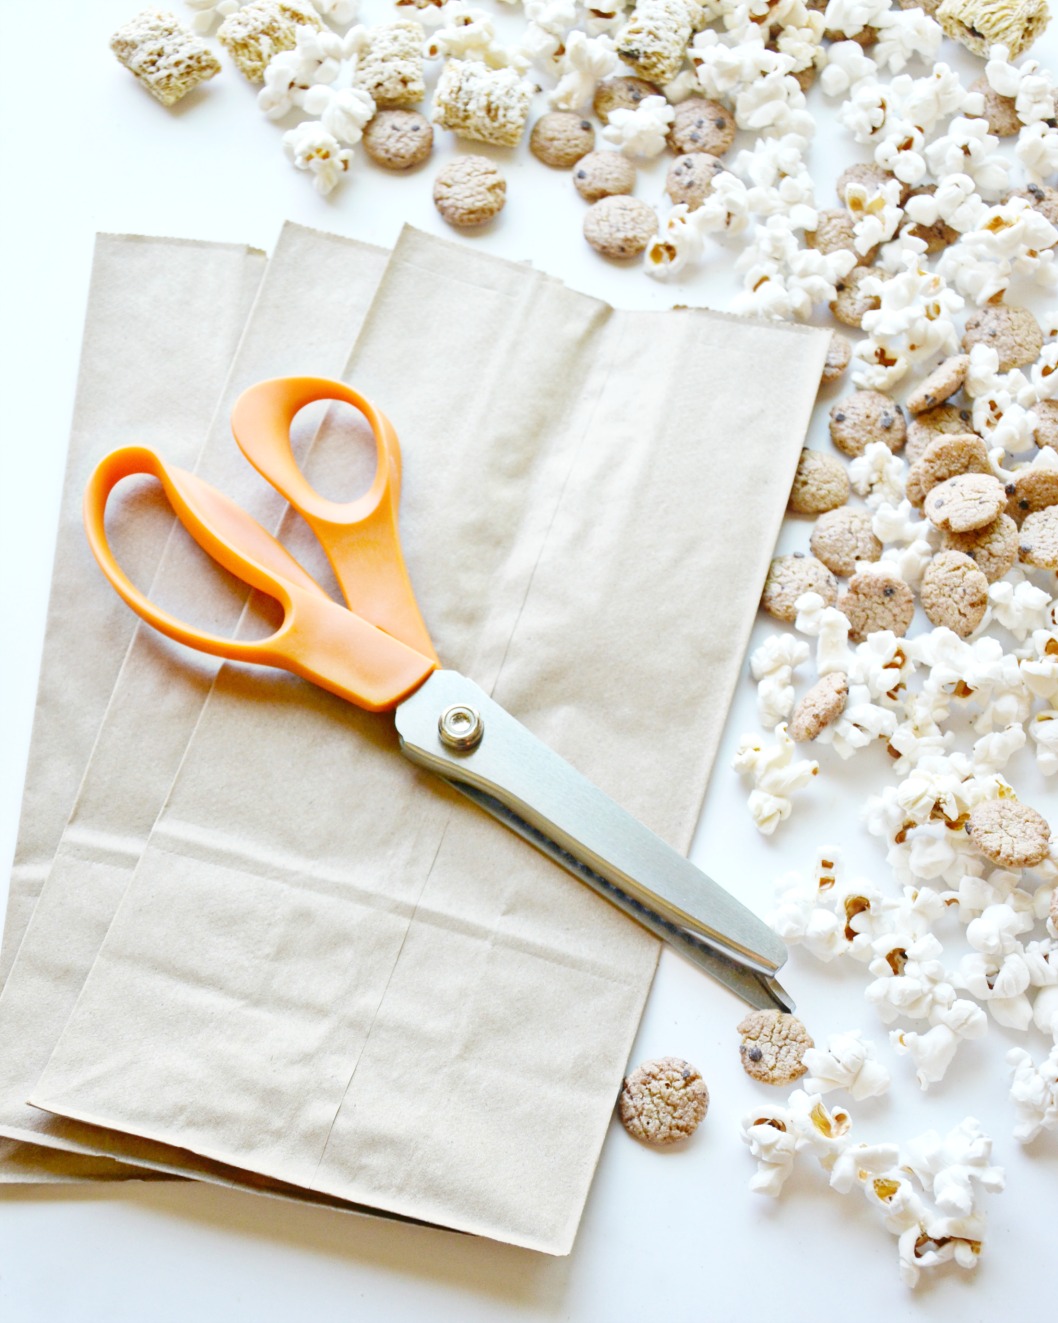 This cereal popcorn snack mix recipe is yummy with Chocolatey Chip Cookie Bites or your favorite cereal mix in for family movie nights!